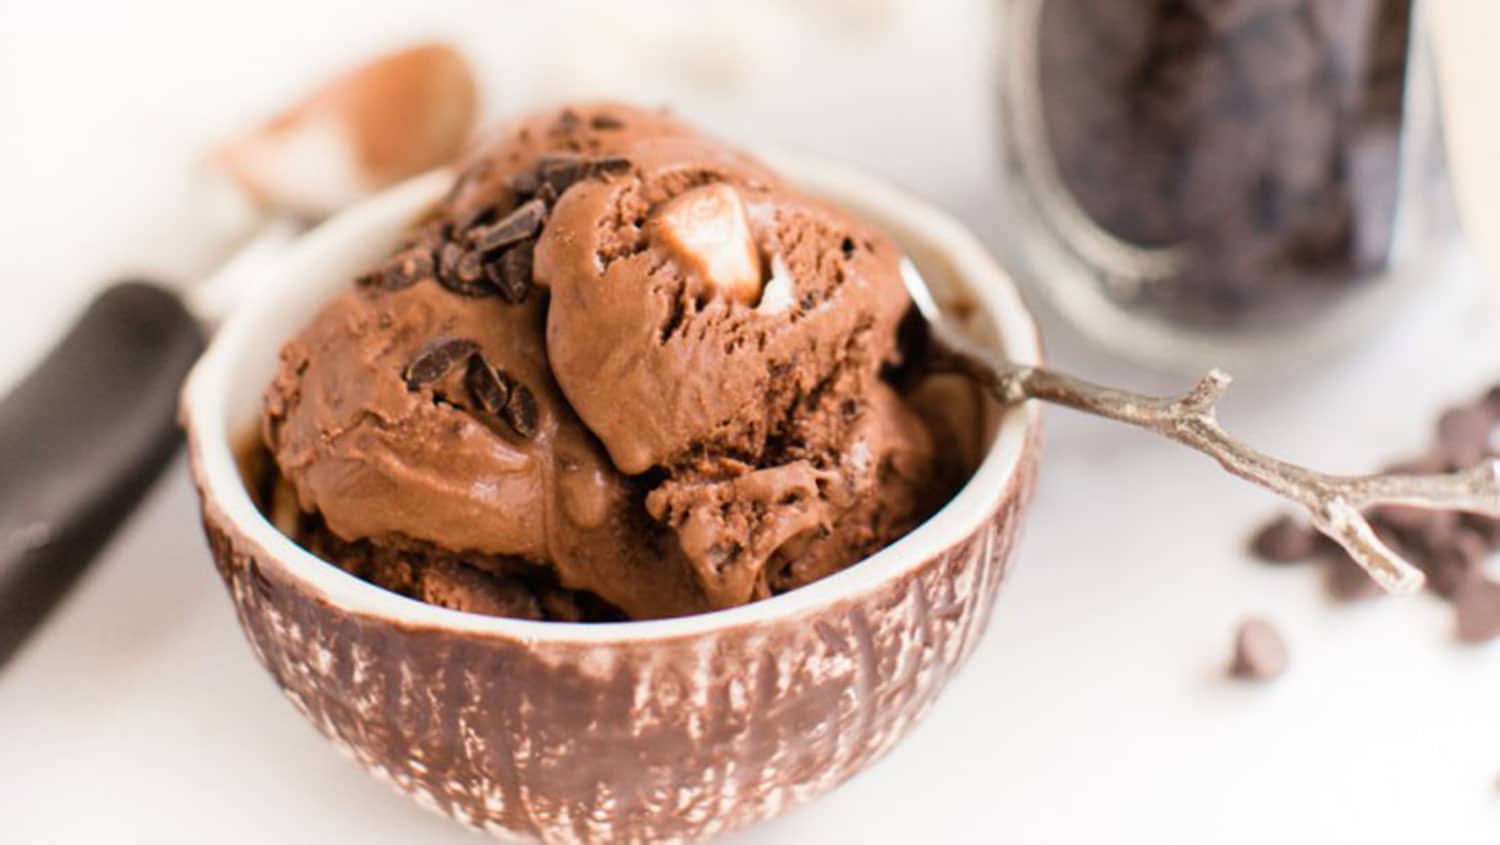 Vegan rocky road ice cream in a bowl with a spoon.